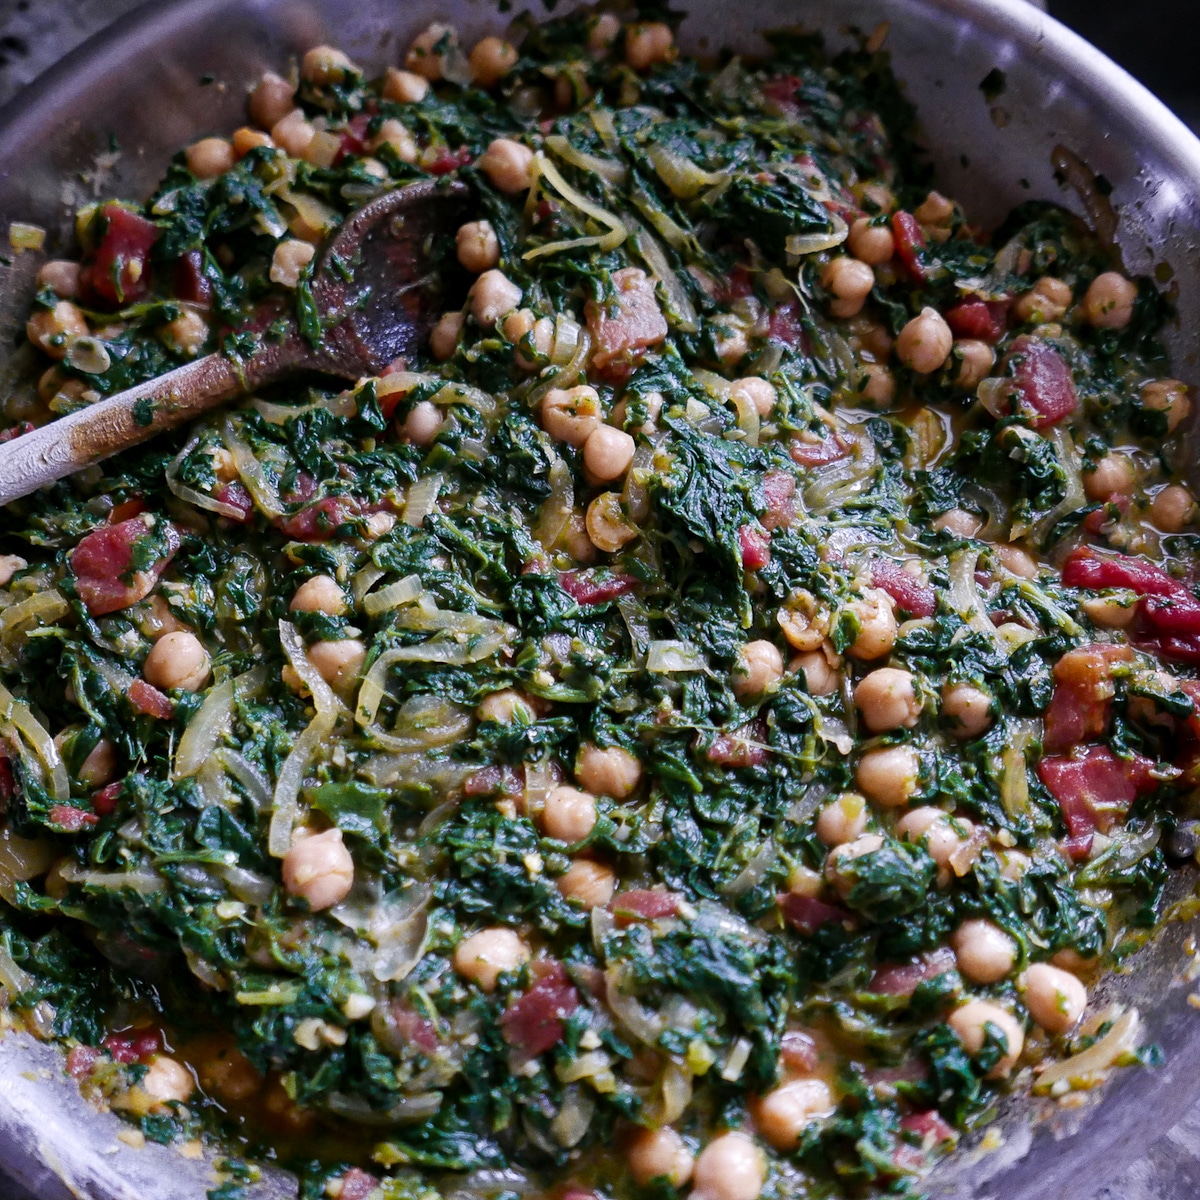 skillet with chickpeas, spinach, tomatoes, and onion and a wooden spoon.